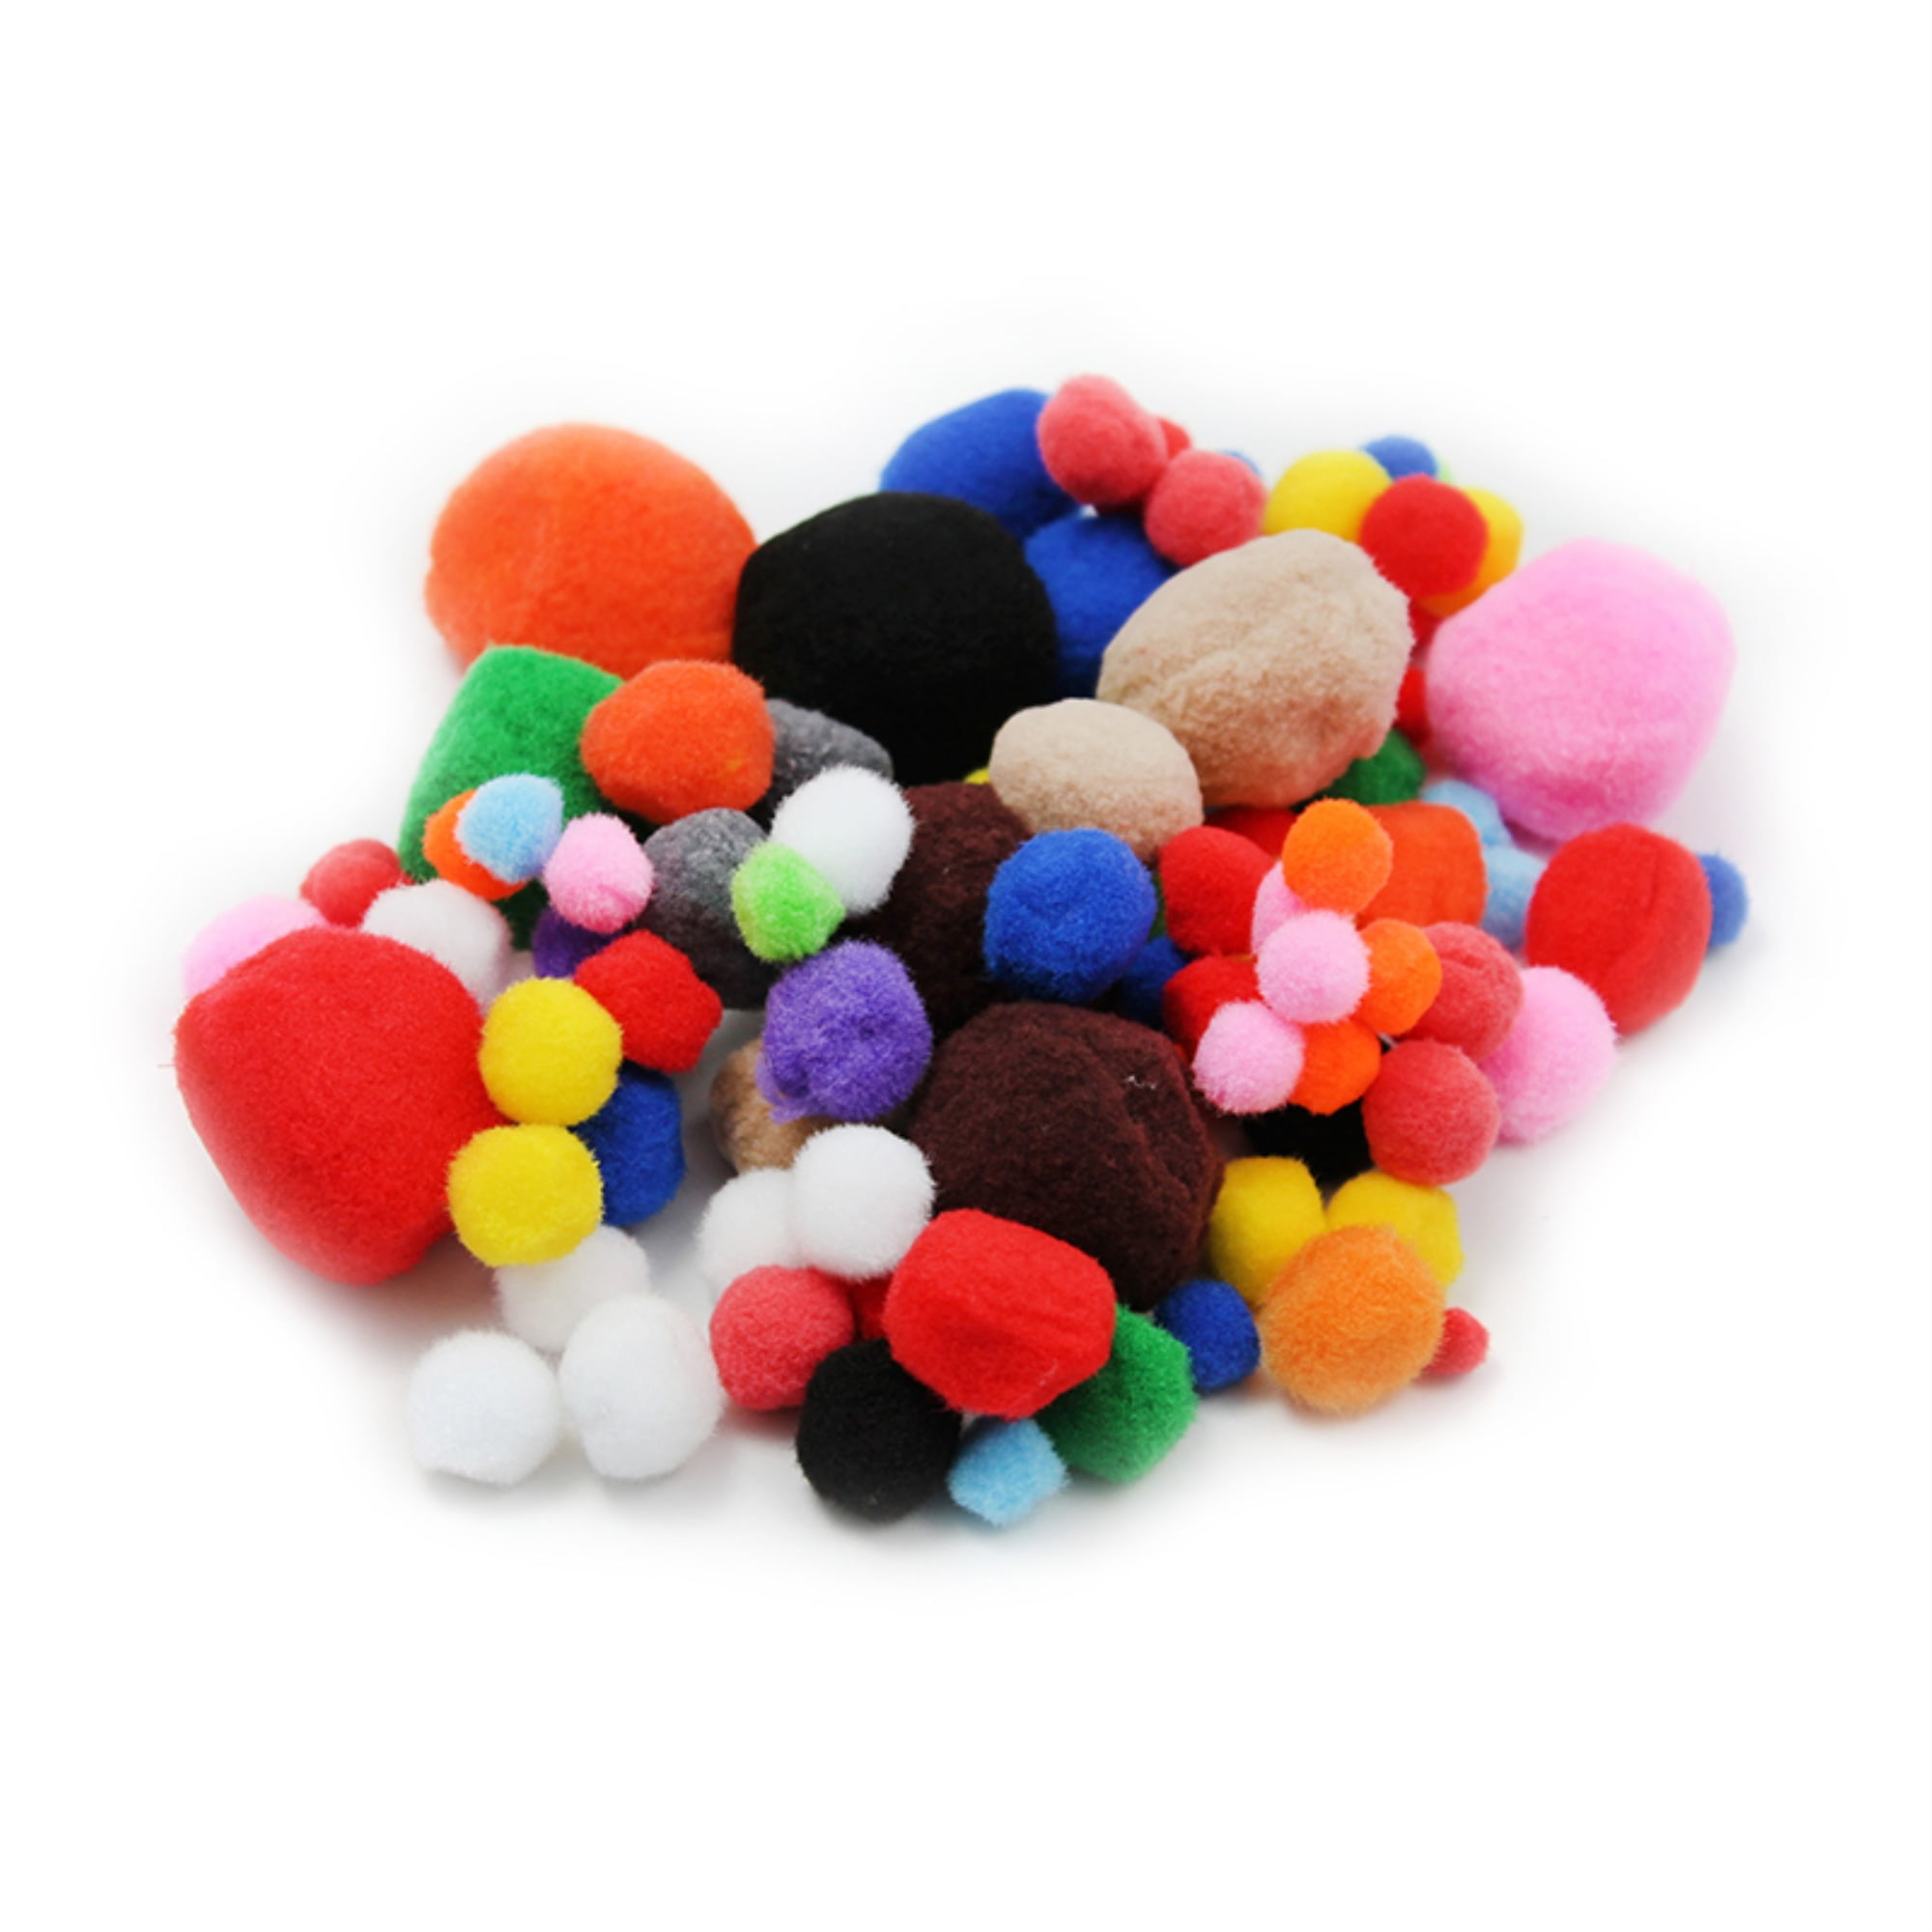 Crafter's Square Multicolored Craft Pom-Poms, 80-ct. Packs